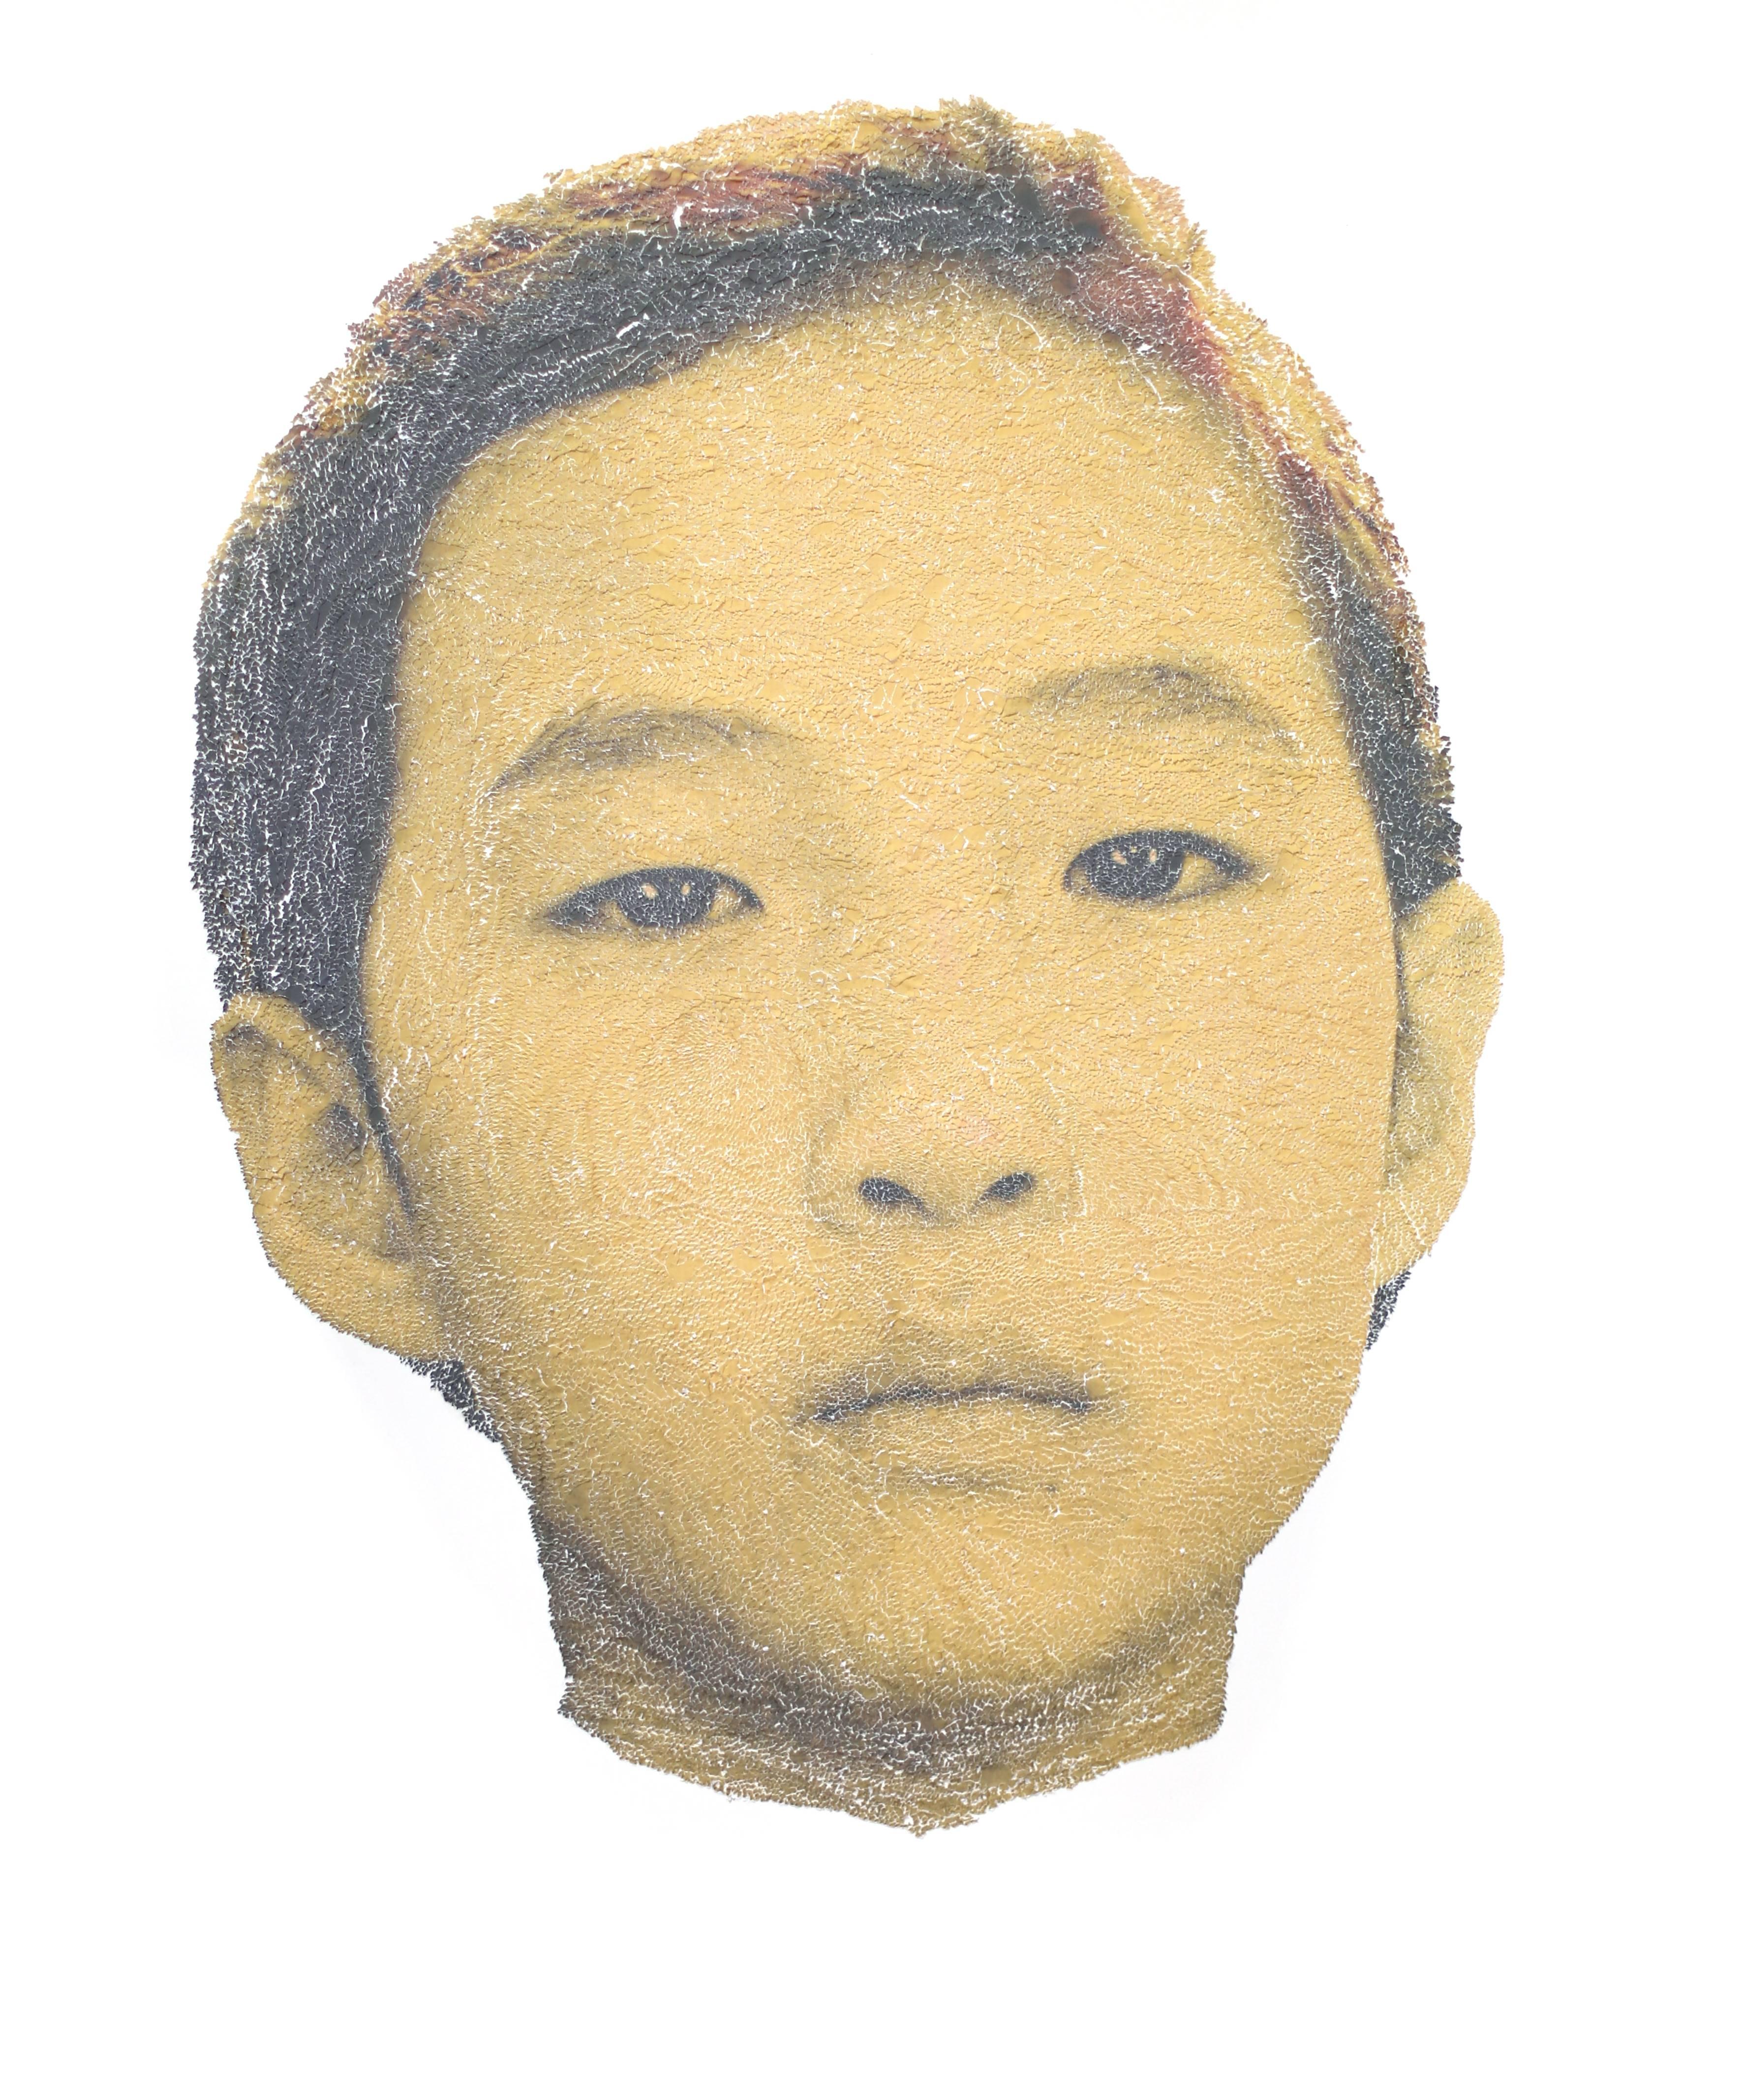 Keun Young Park Portrait Photograph - Joanne Yellow- Torn and pasted photo on paper- Portrait micro mosaic collage